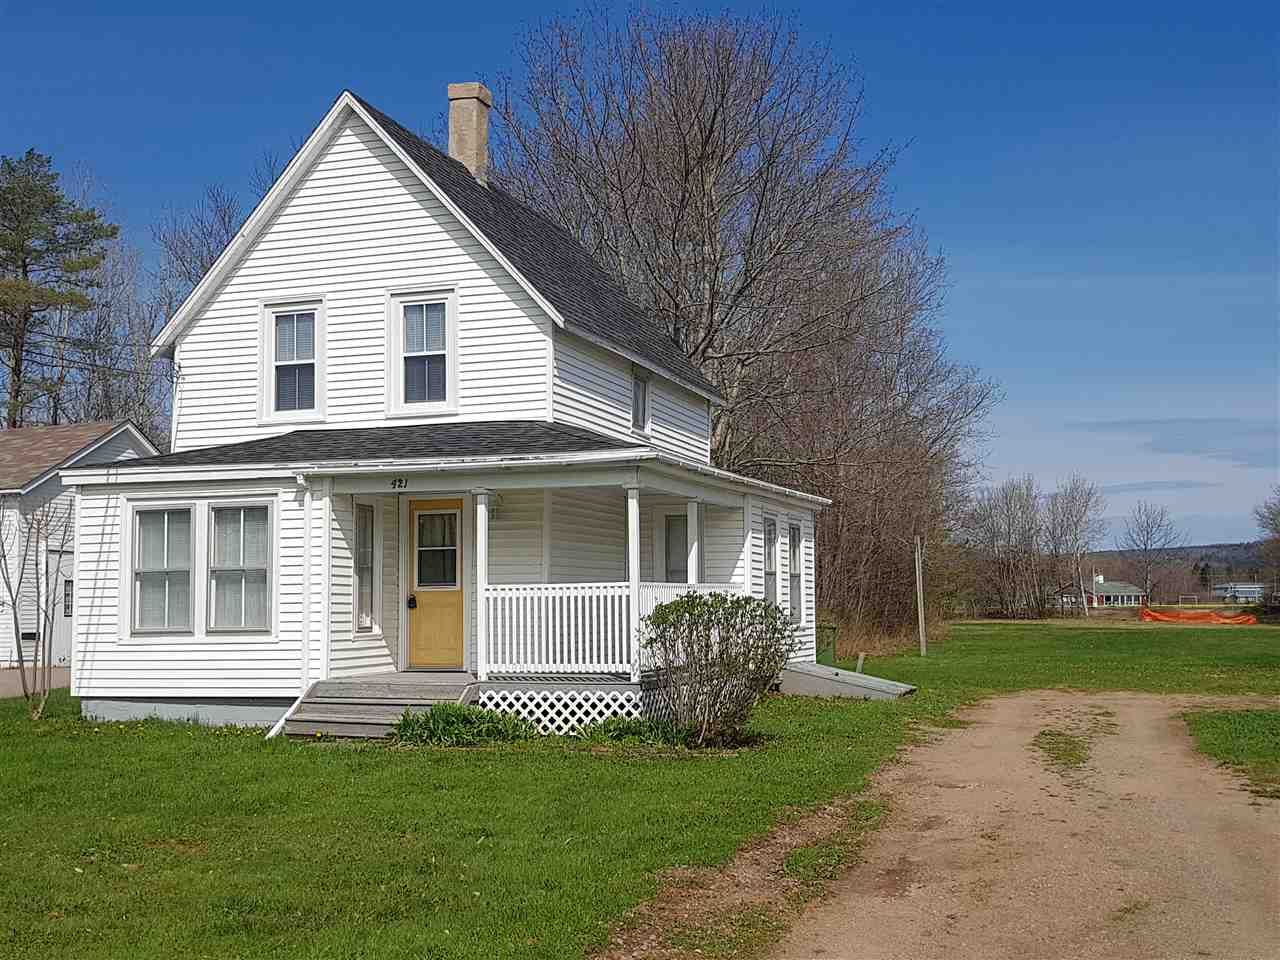 Main Photo: 421 MAIN Street in Middleton: 400-Annapolis County Residential for sale (Annapolis Valley)  : MLS®# 201809953